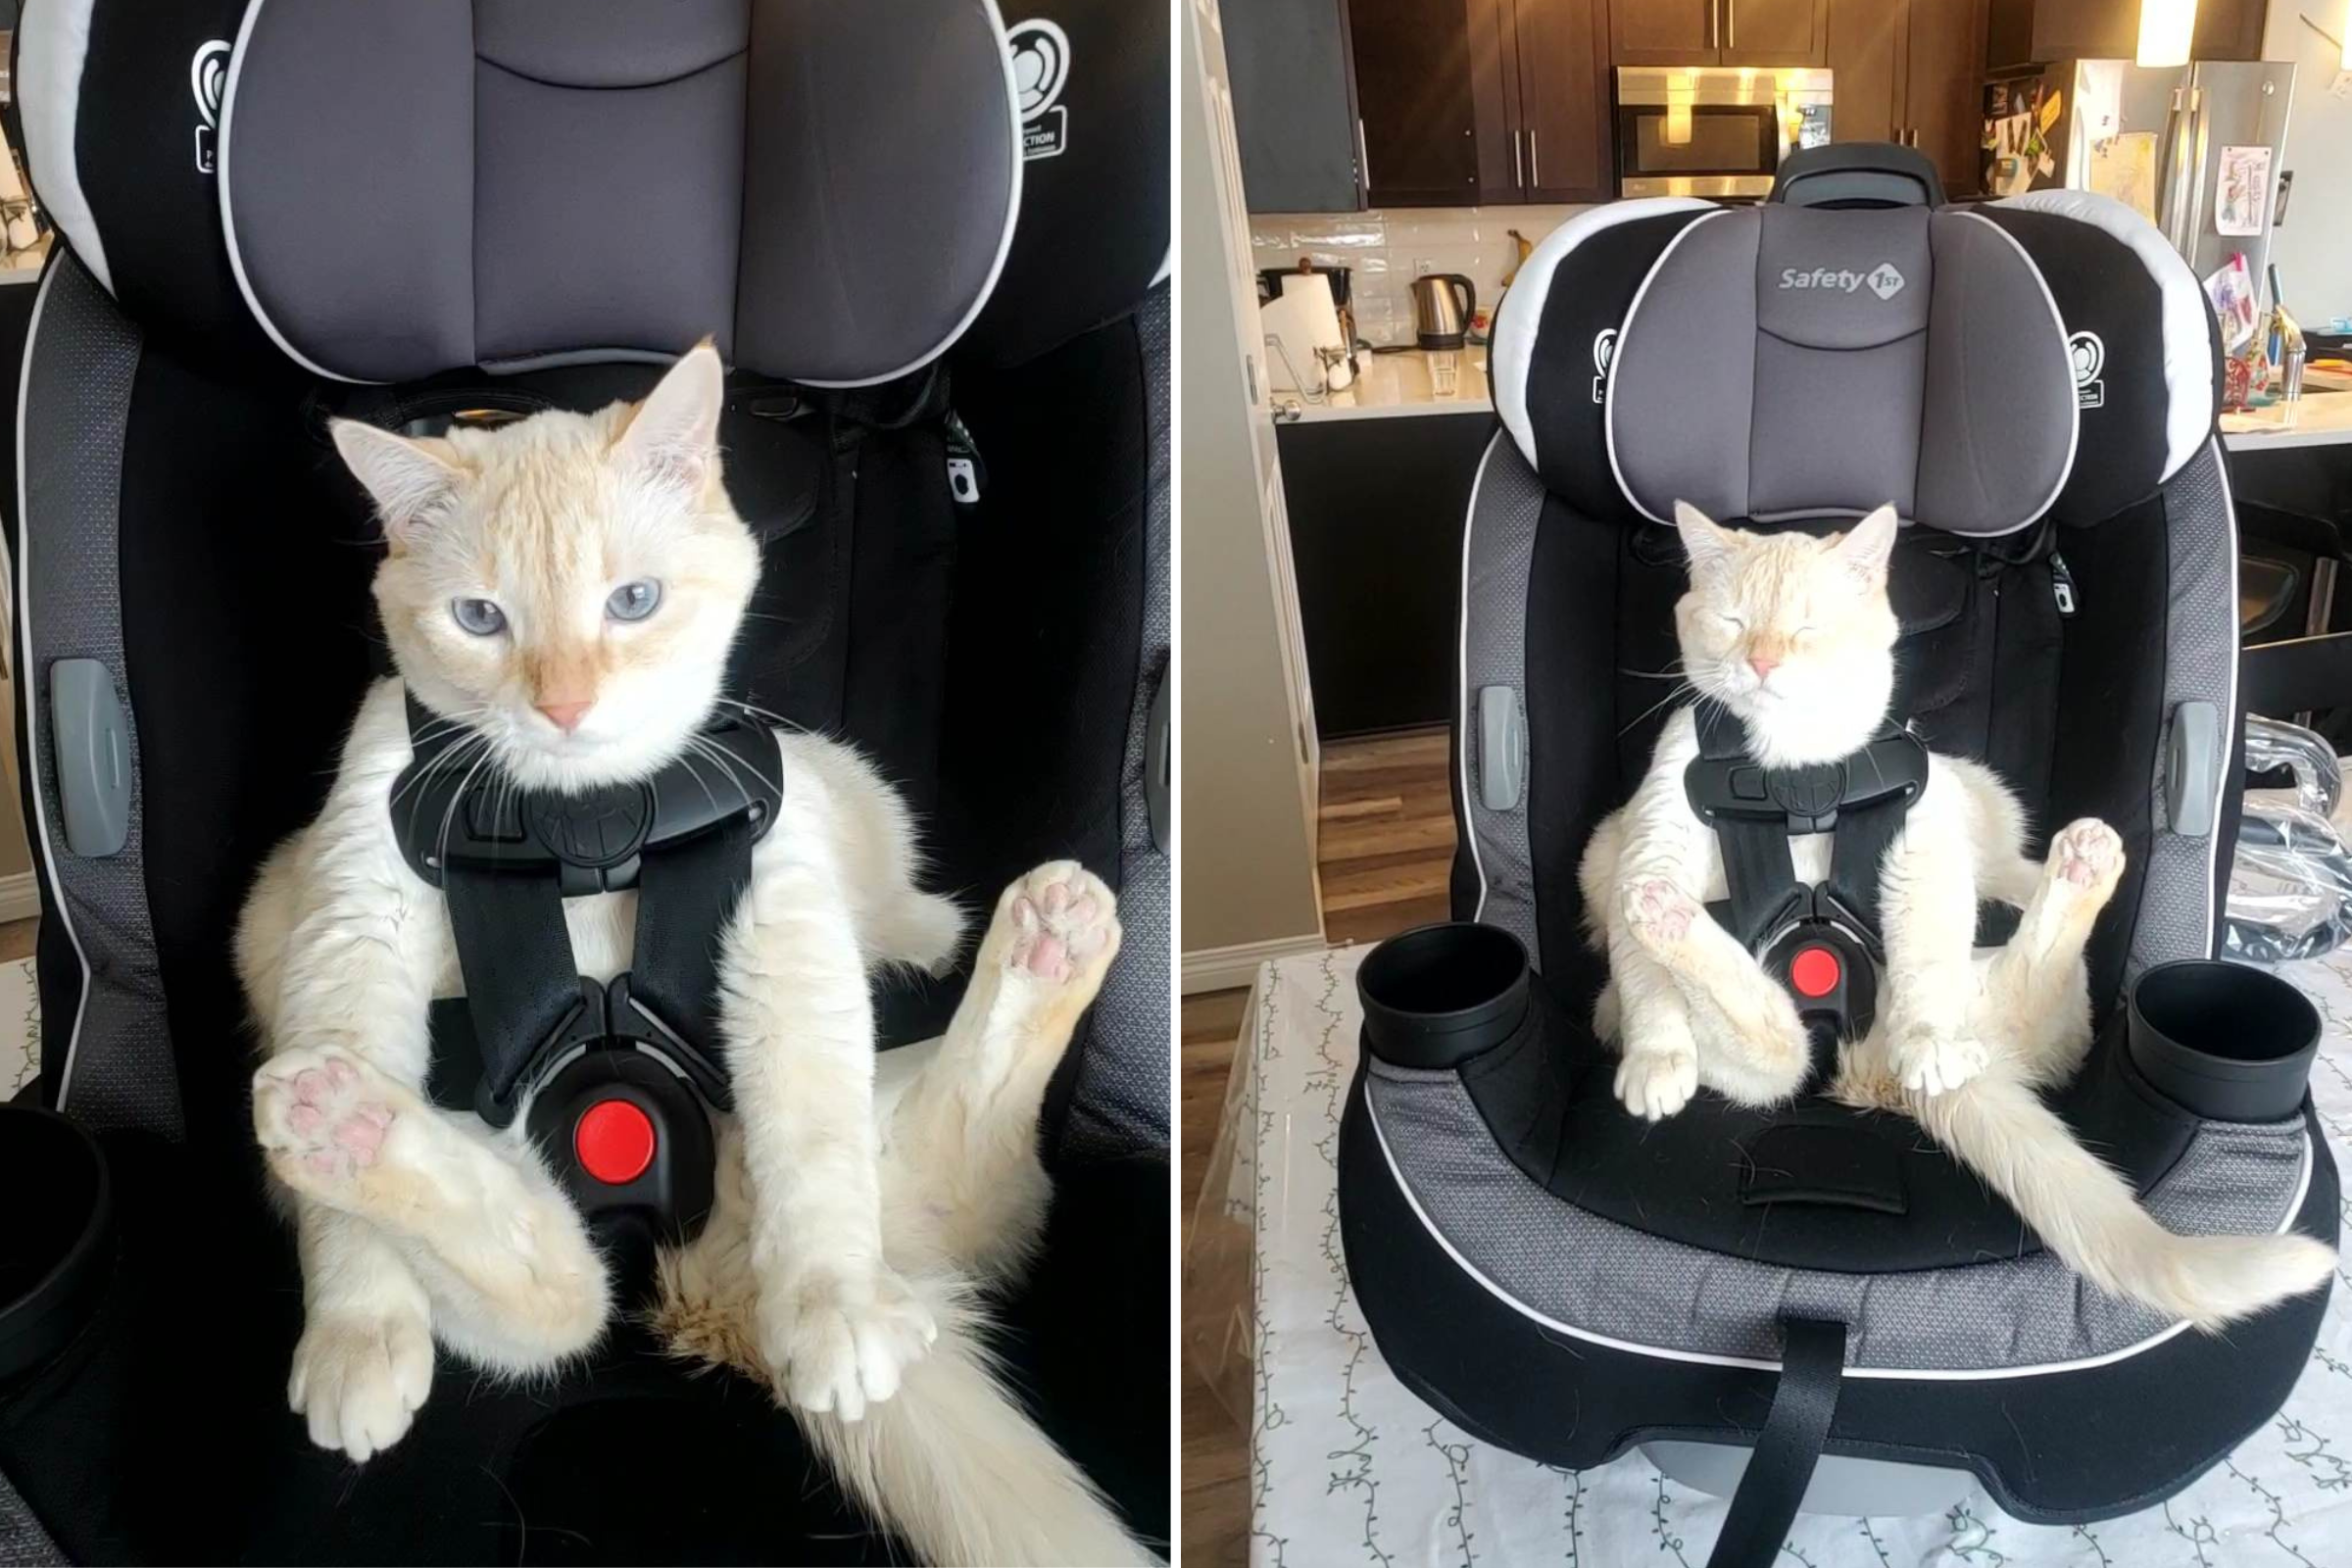 Feline Who 'Hates the Cat Carrier' Photographed Relaxing in Car Seat